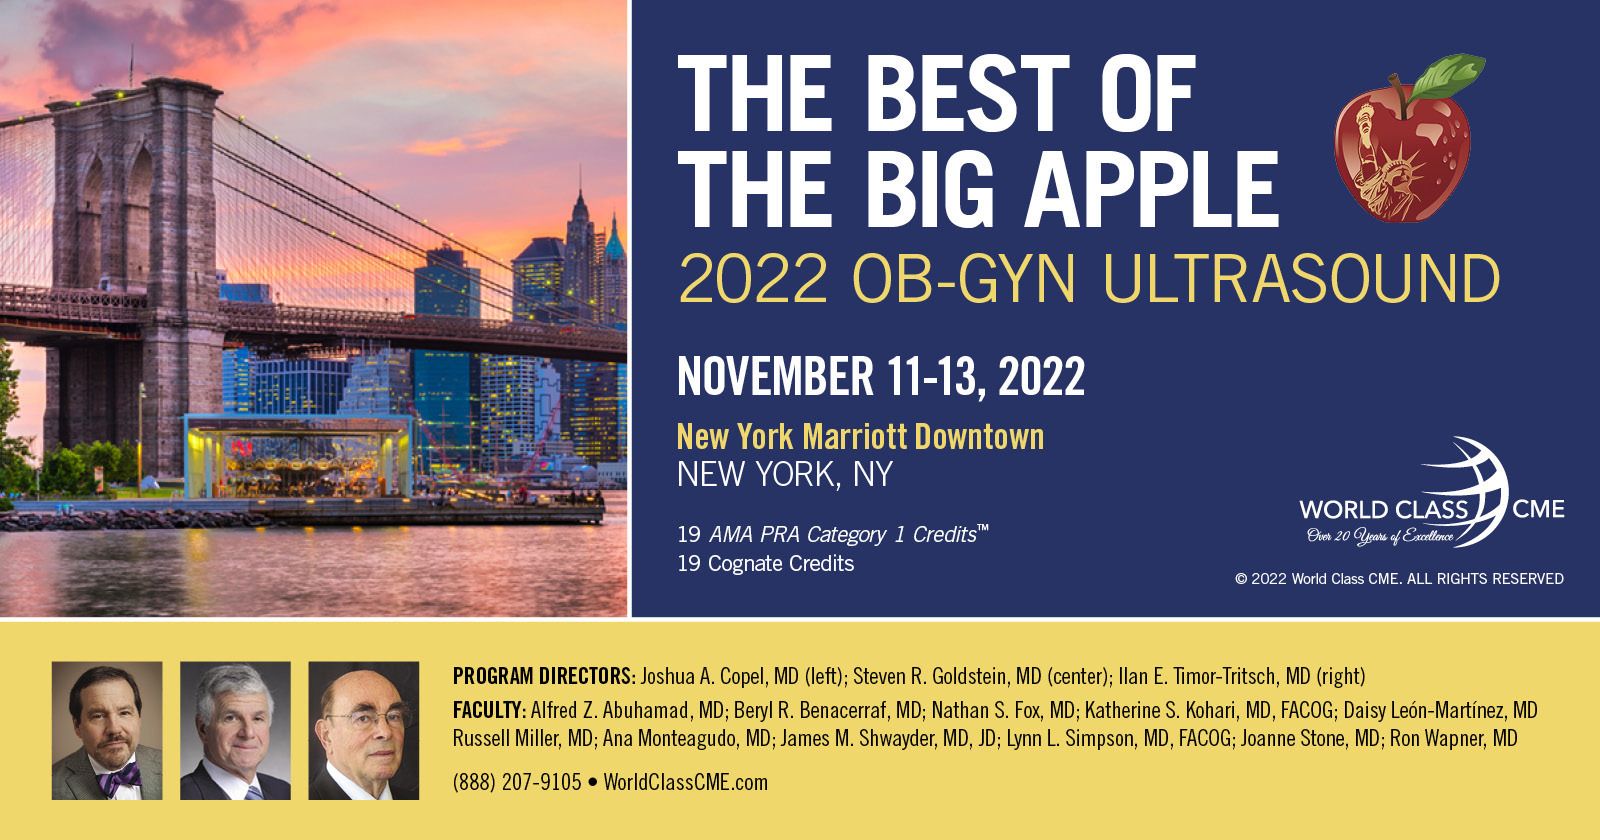 The Best of the Big Apple 2022 OBGYN Ultrasound